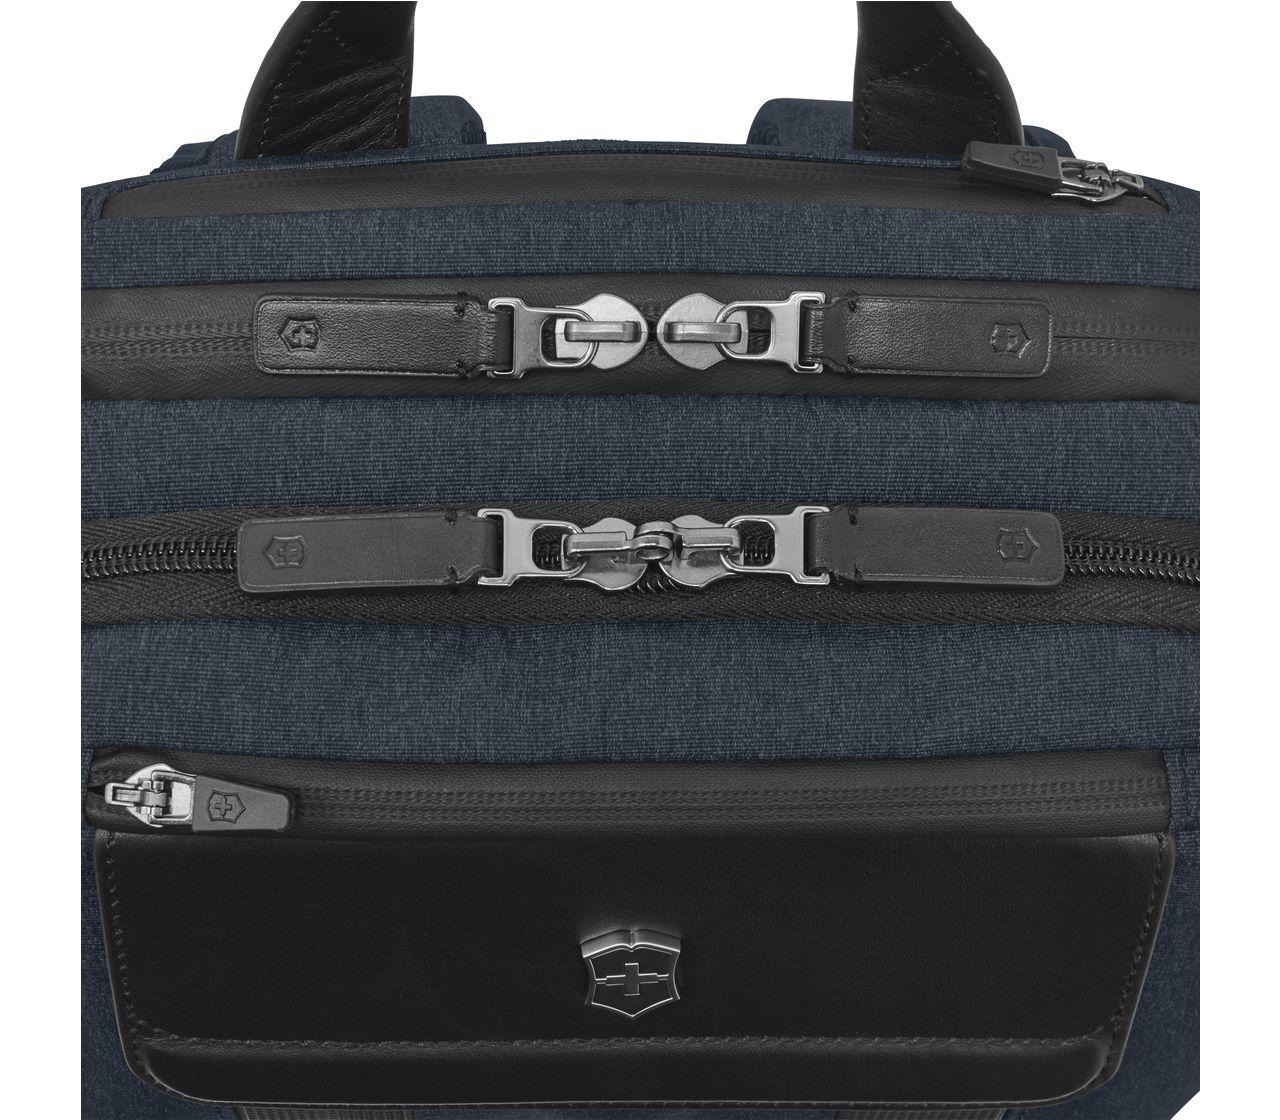 Architecture Urban2 Deluxe Backpack-612669